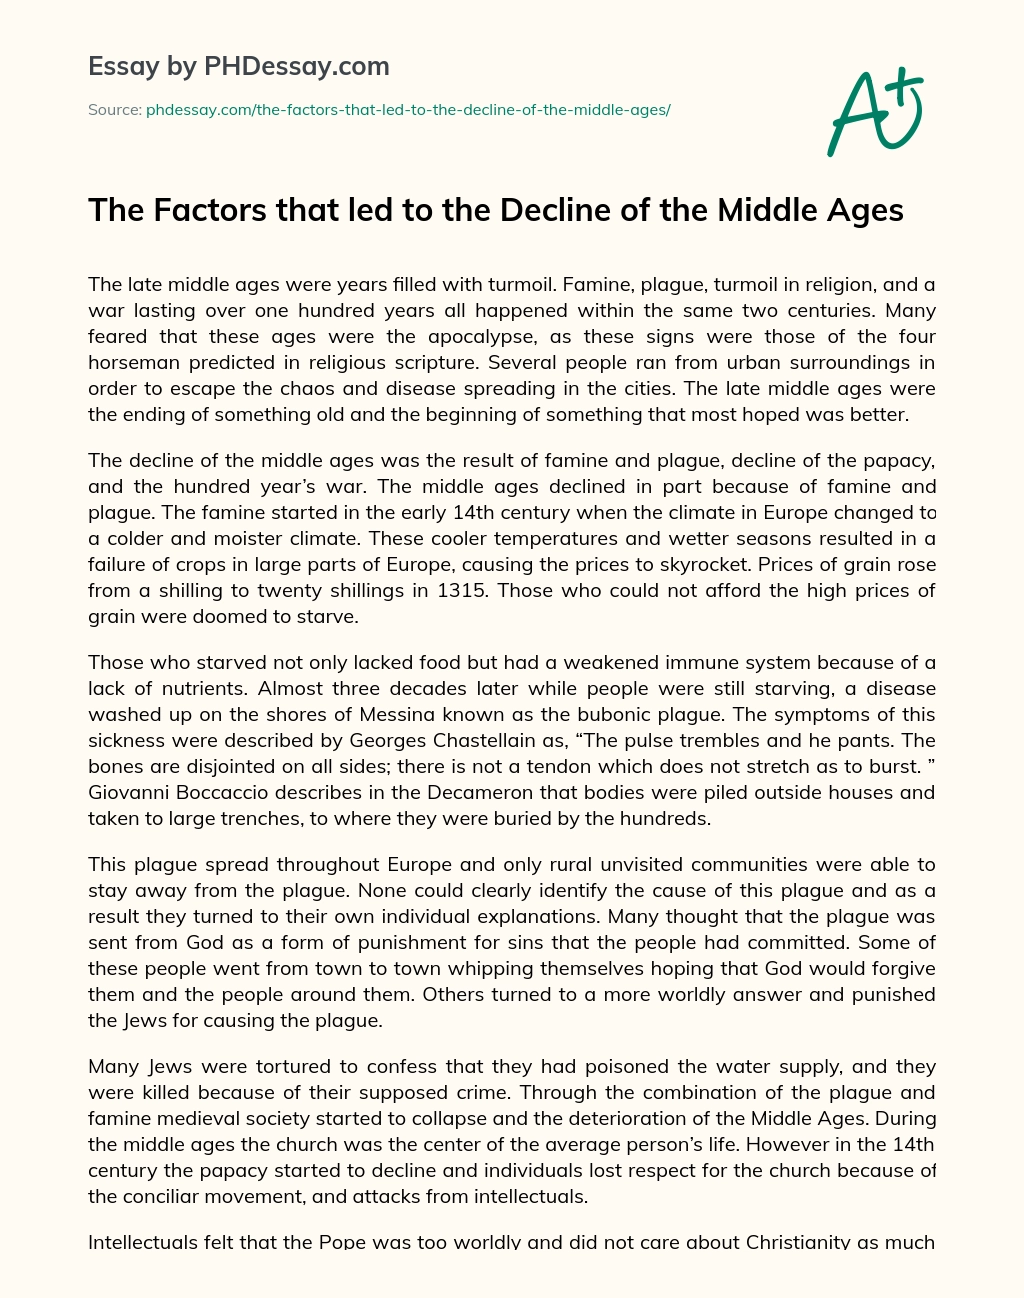 The Factors that led to the Decline of the Middle Ages essay